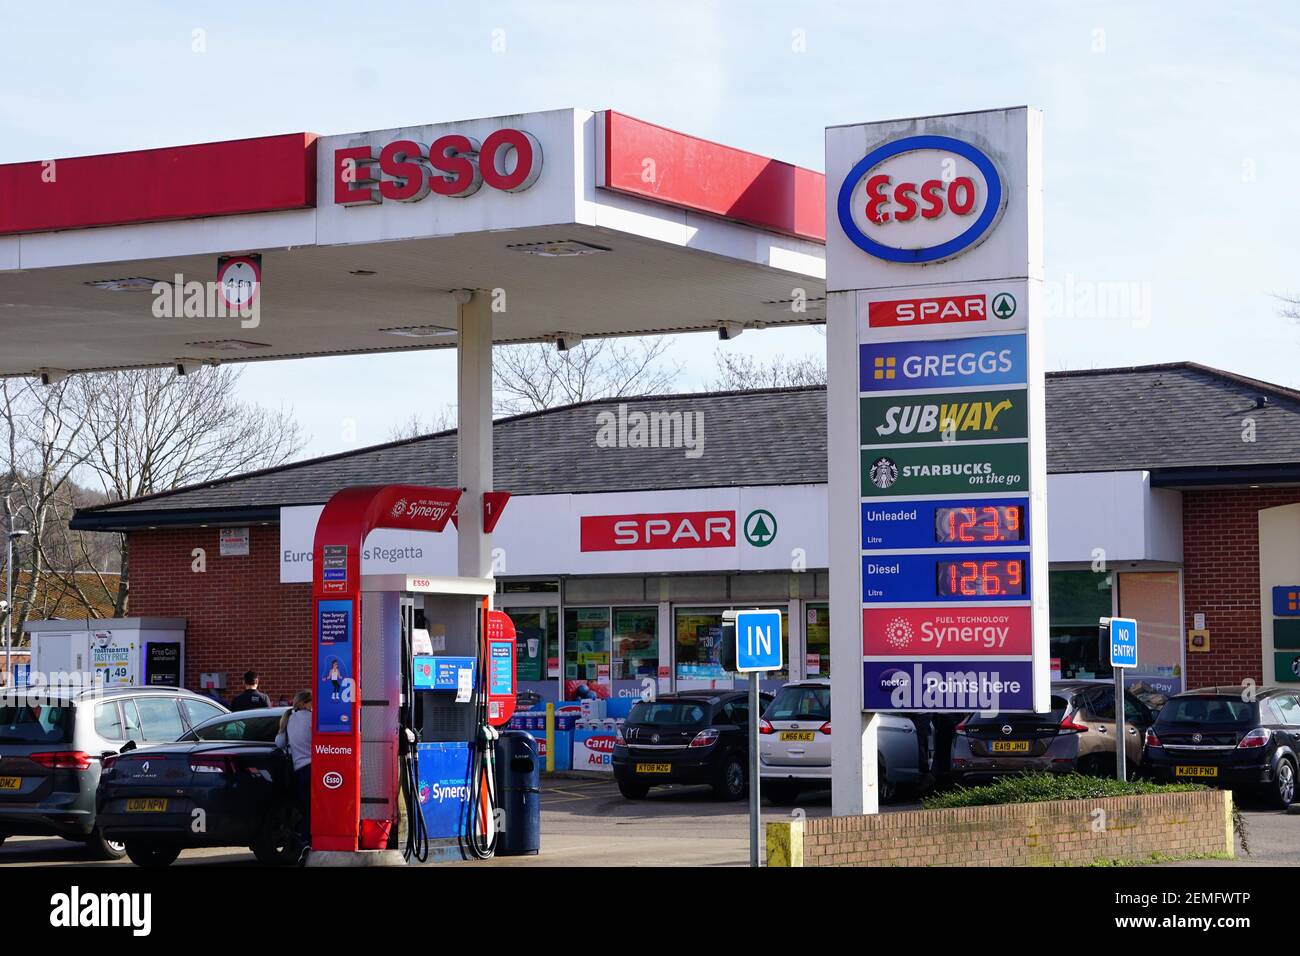 Esso garage forecourt in Henley-on-Thames, Oxfordshire, UK Stock Photo